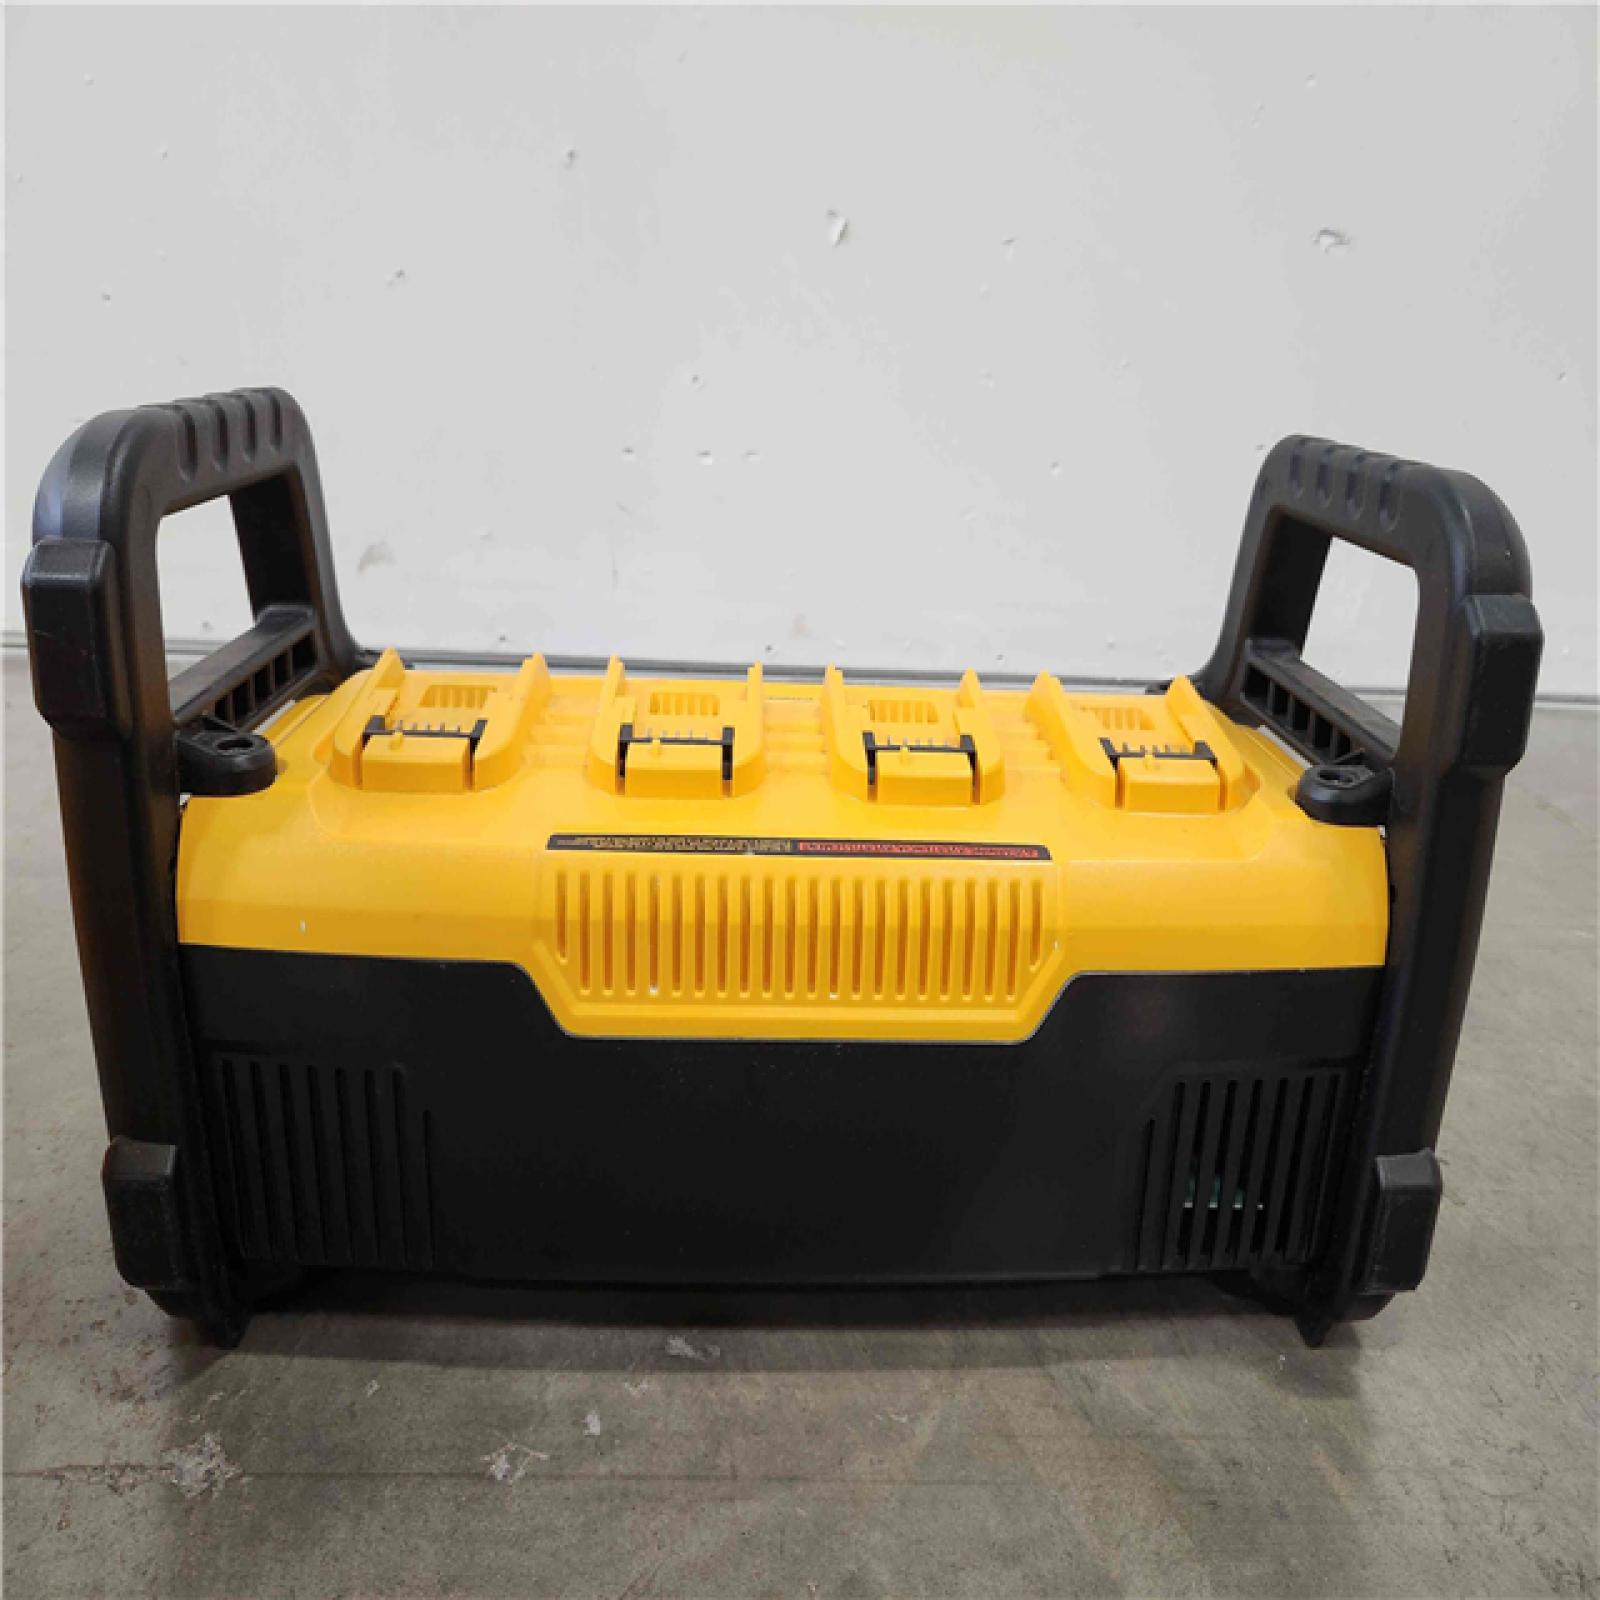 Phoenix Location Appears NEW DEWALT 1800 Watt Portable Power Station and 20V/60V MAX Lithium-Ion Battery Charger DCB1800B